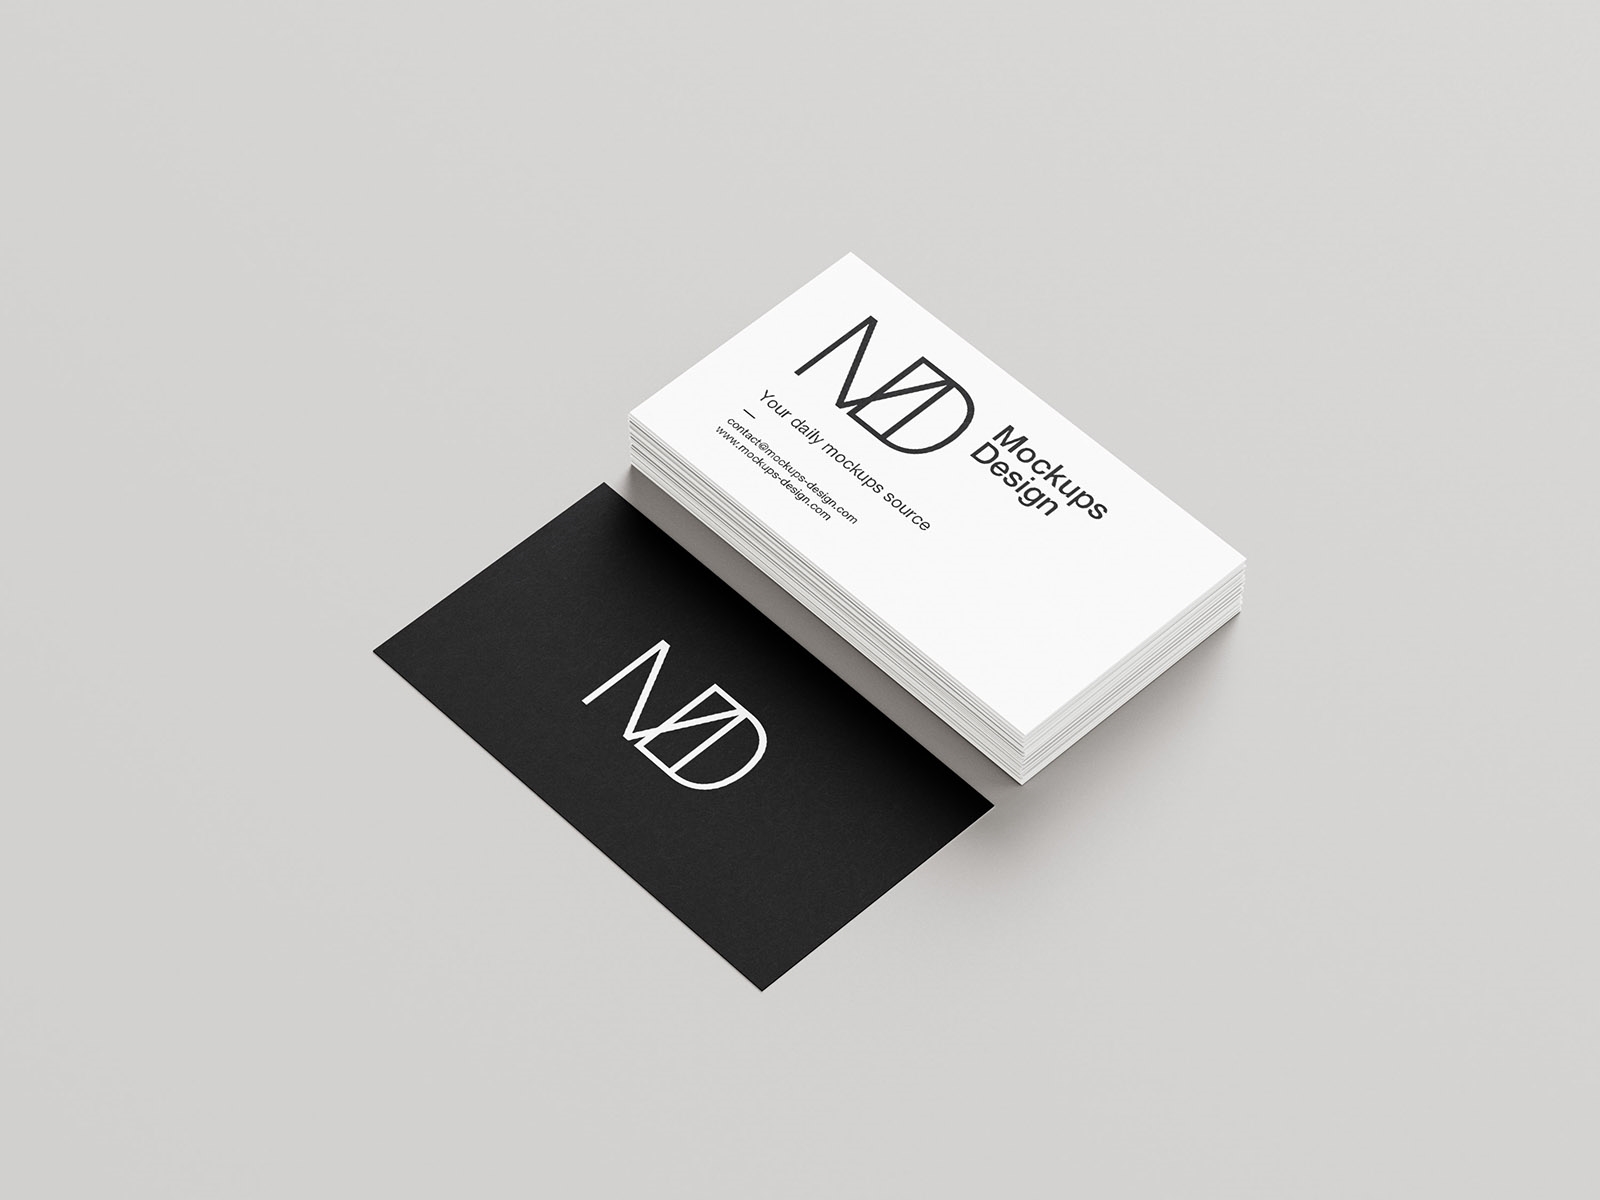 5 Mockups of Business Cards in Stacks in Different Angles FREE PSD